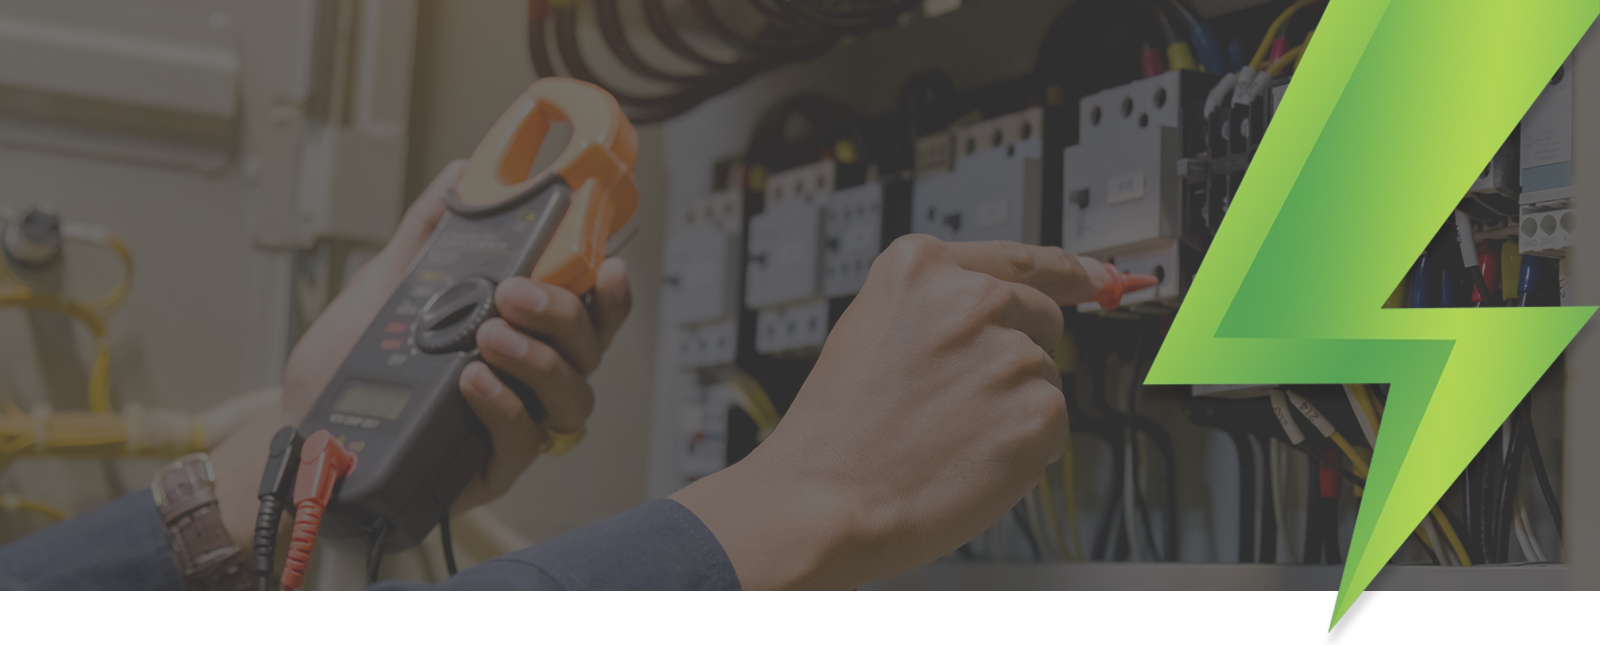 Delray Electric Ltd. - Electrical Services Company handling all electrical problems in Morinville, Edmonton